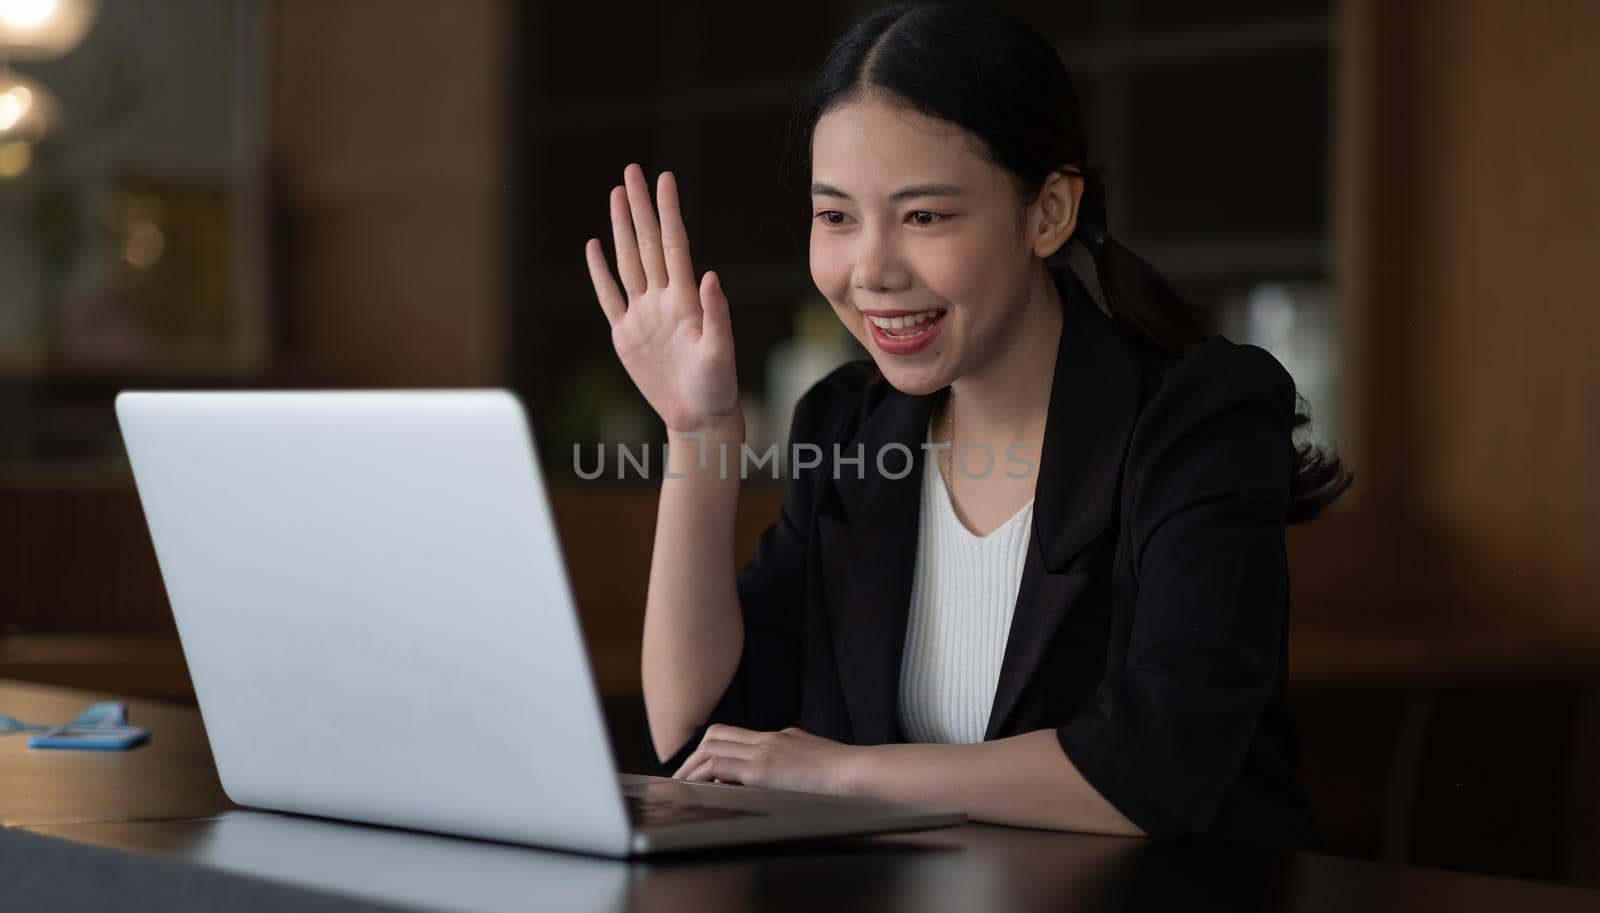 Image of happy asian woman wearing white shirt smiling and waving hand at laptop, while speaking or chatting on video call in office